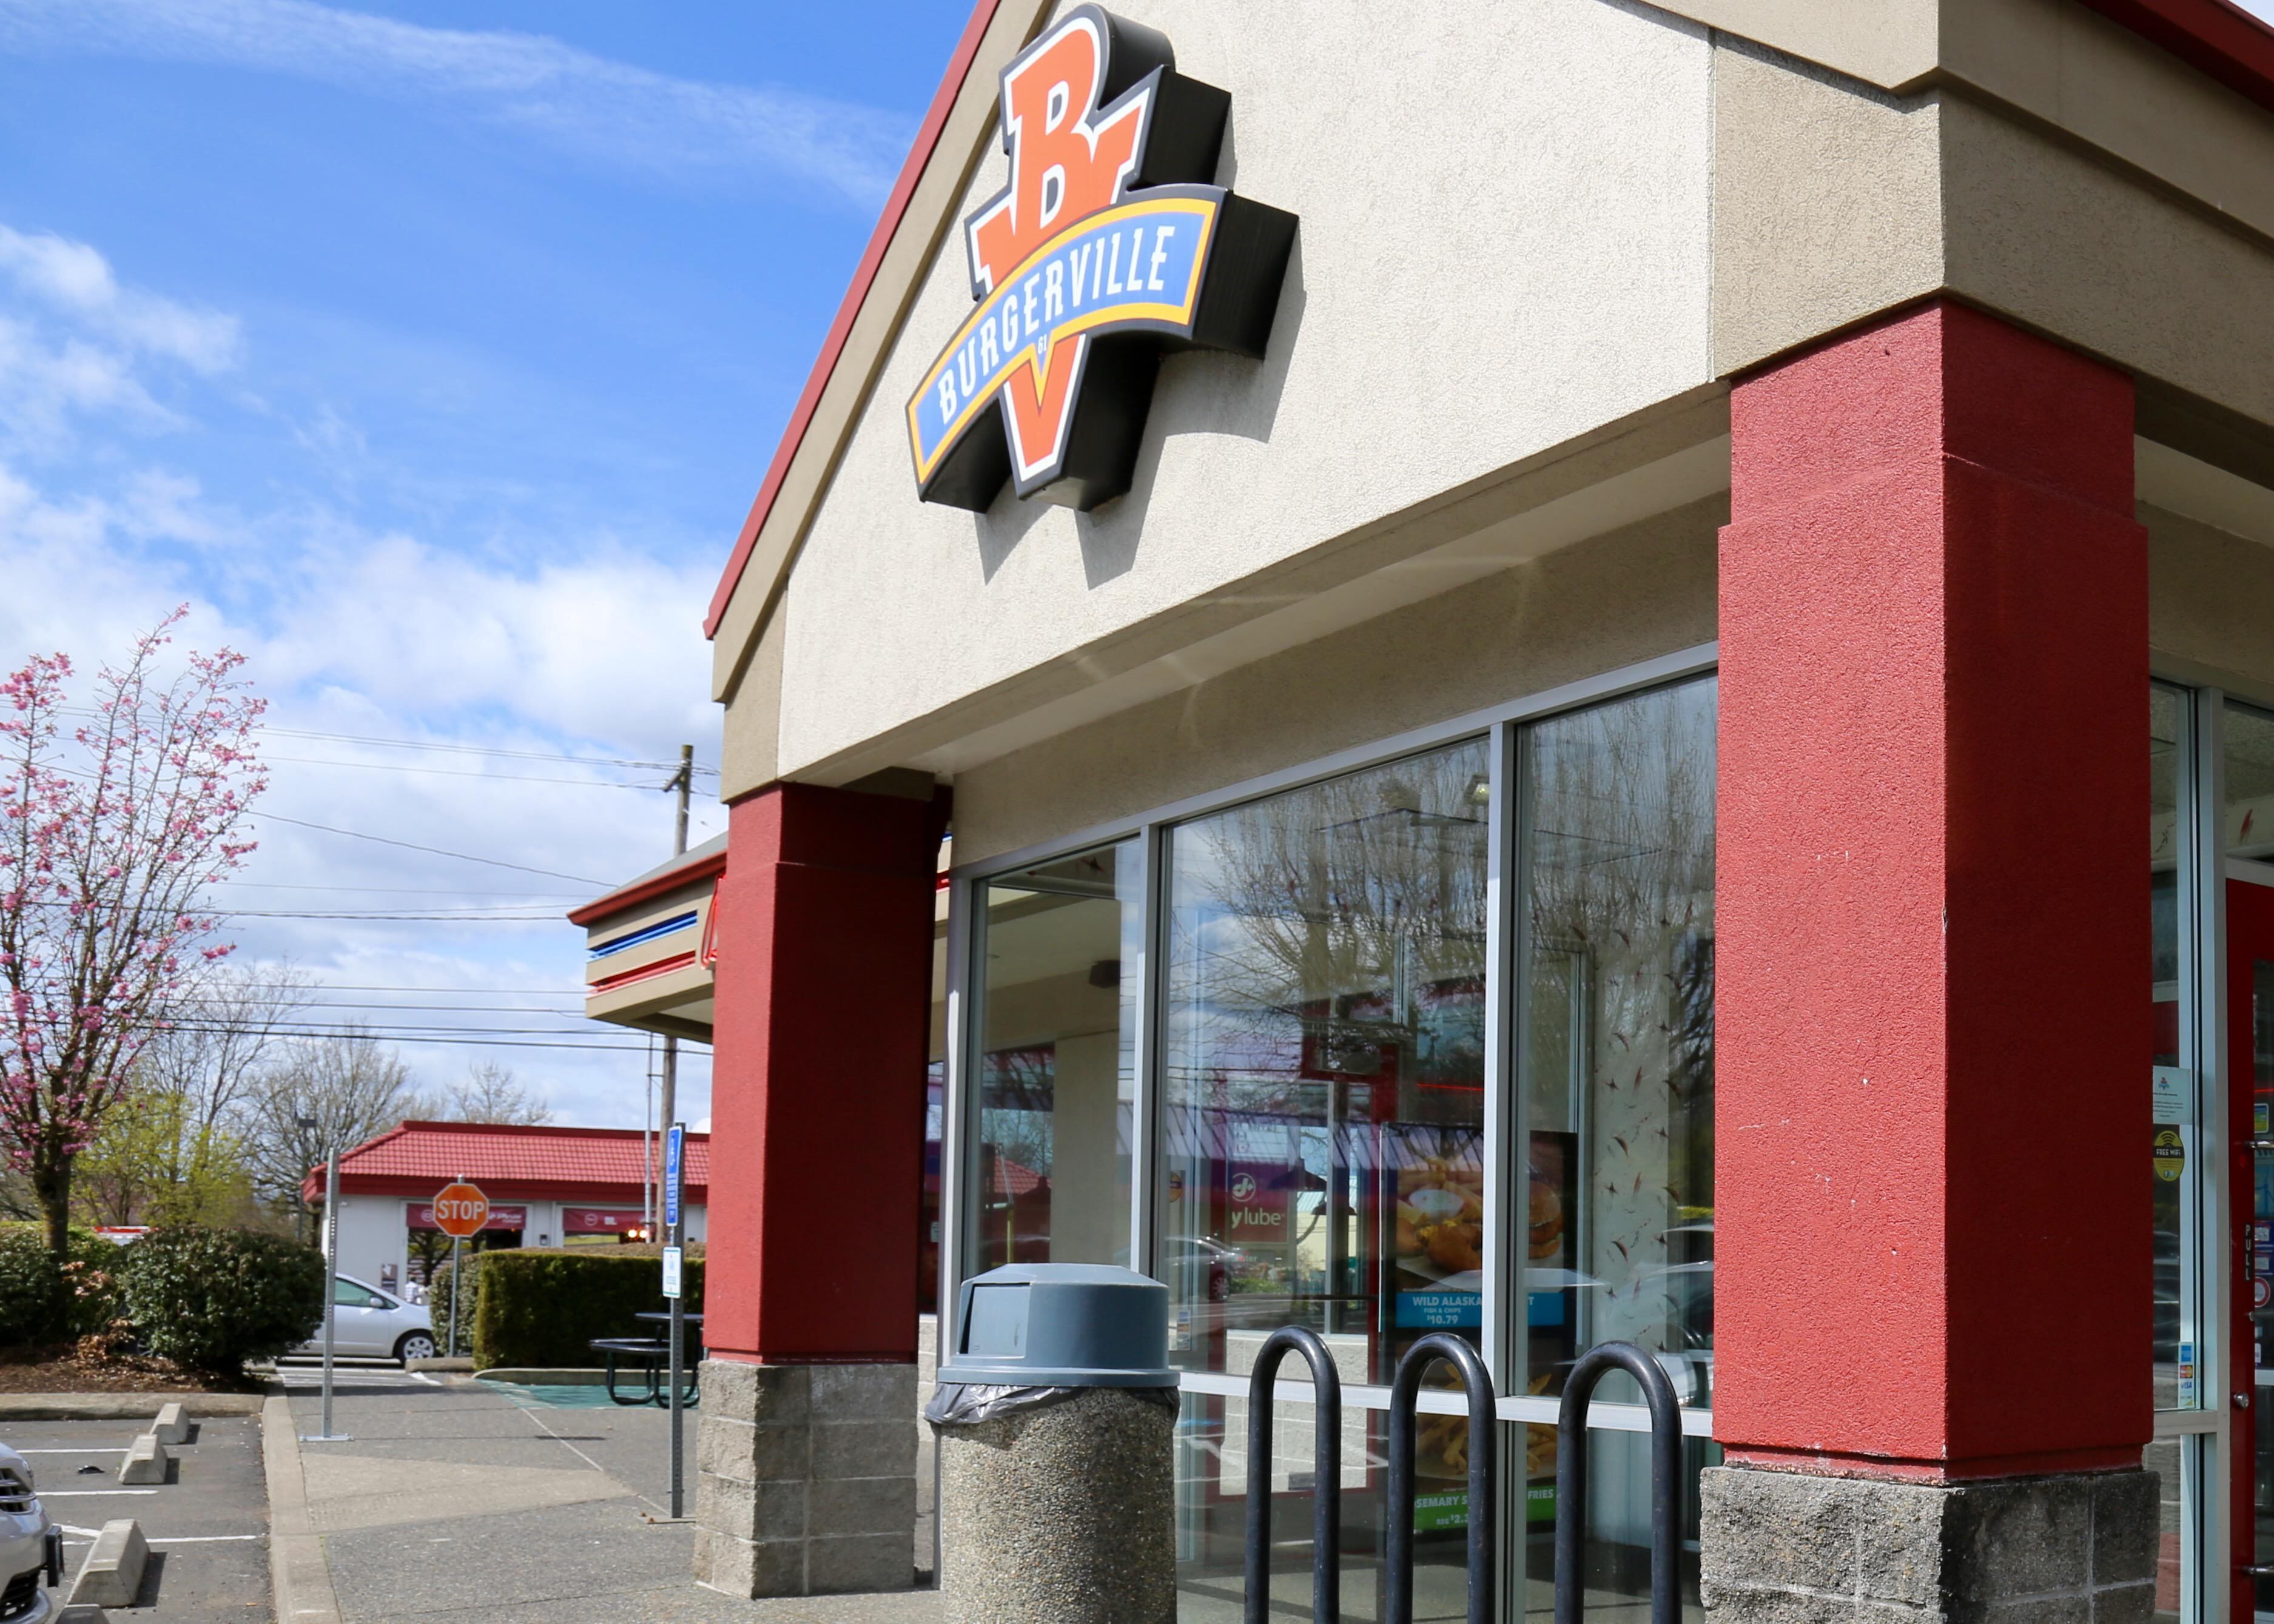 The Vancouver-based chain Burgerville has 39 restaurants in Oregon and Washington.